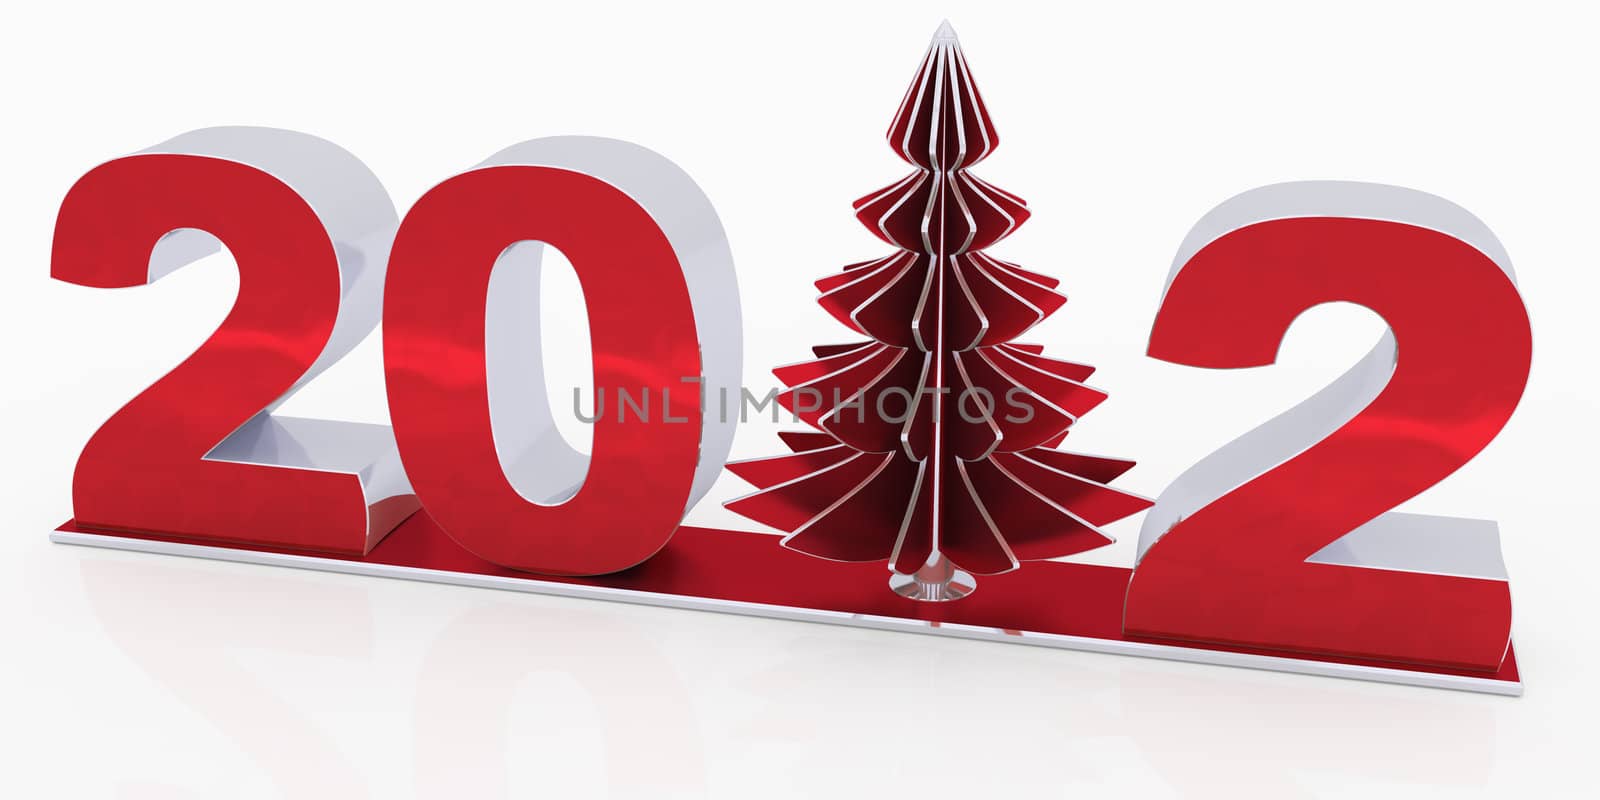 3d numerals "2012" of red metallic and silver on pedestal. Numeral "1" replaced with christmas tree.